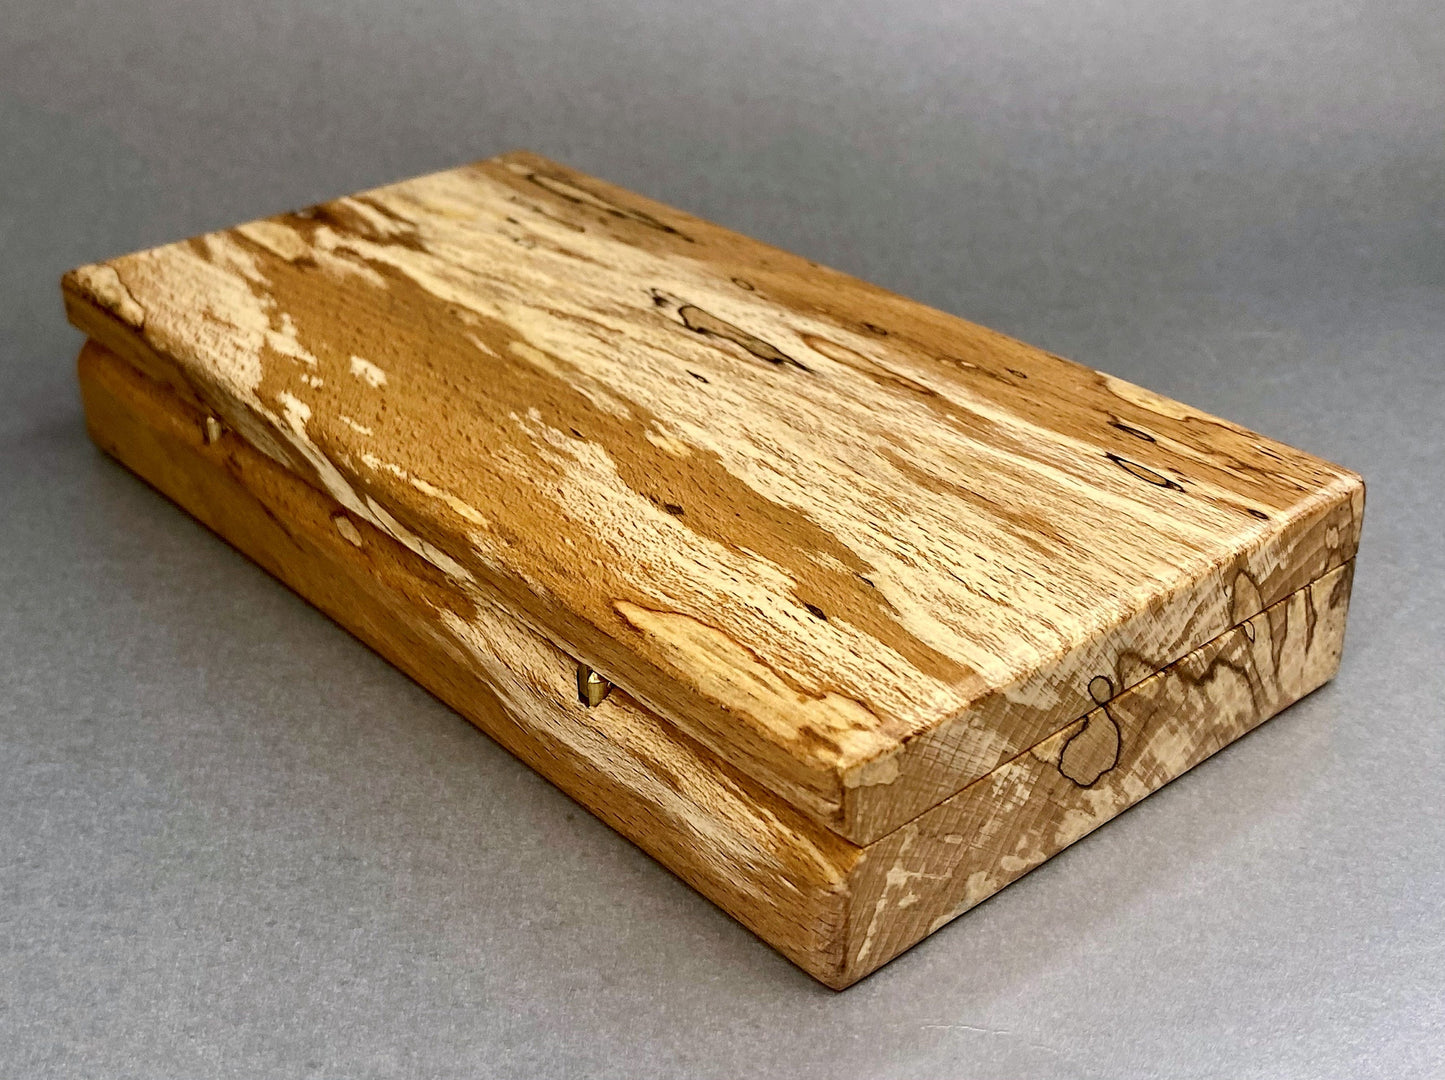 ~Spalted Beech wood hand crafted presentation box with its lid closed showing the spalting effect on the lid and the sides